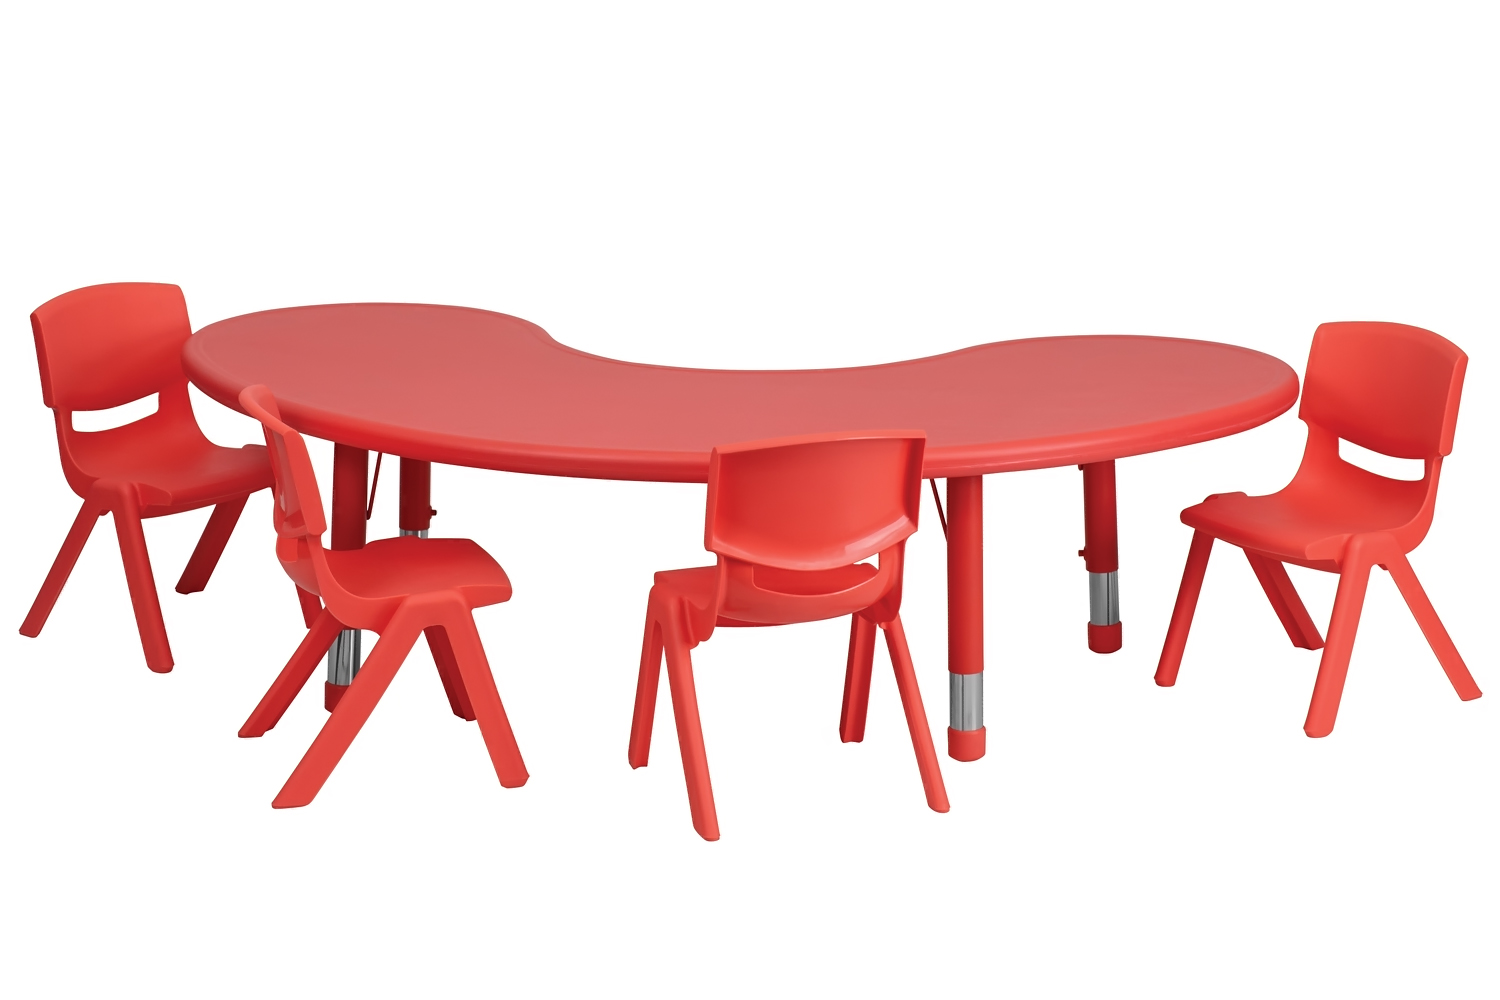 35''W x 65''L Half-Moon Red Plastic Height Adjustable Activity Table Set with 4 Chairs